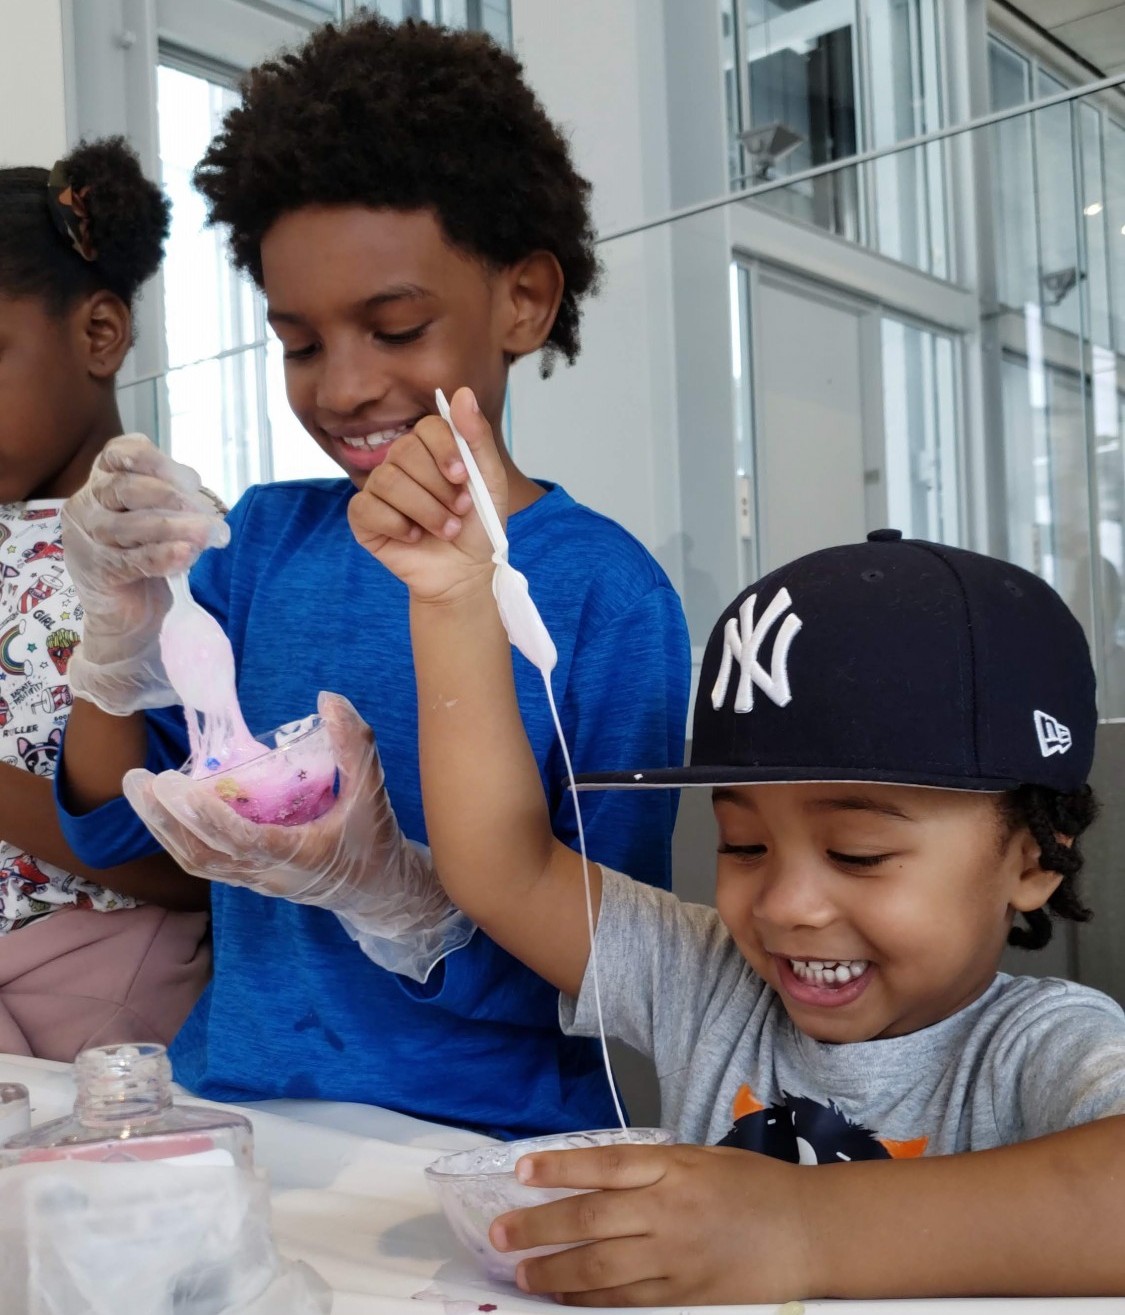 Two children stand alongside each other as they make slime solutions together during the Wellness Center's 'Slime Time' event for Manhattanville's Community Day in April 2019.